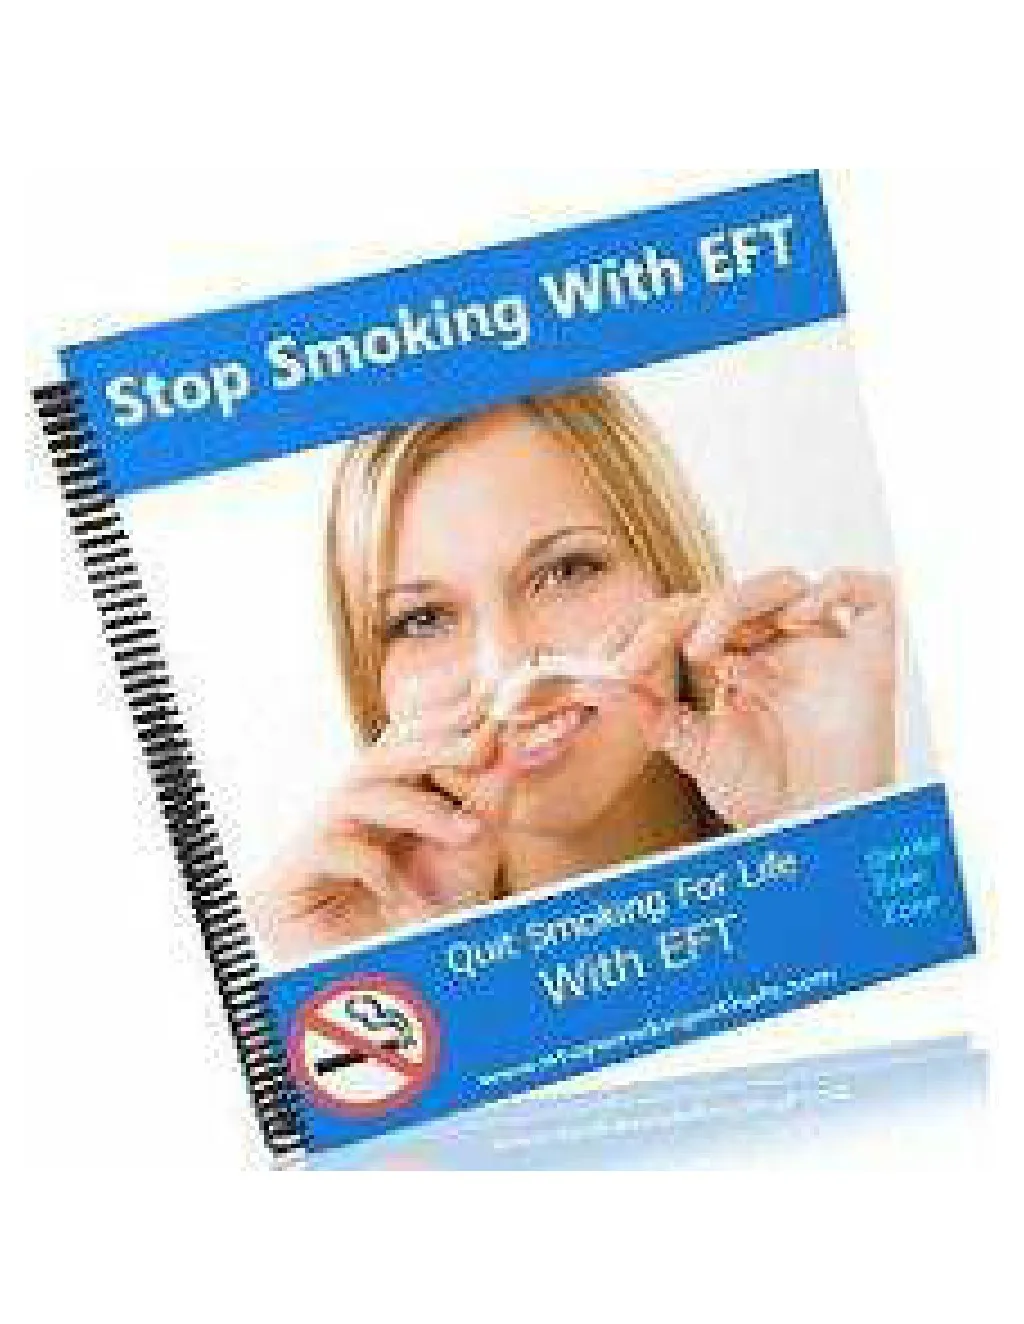 stop smooking with eft pdf ebook free download